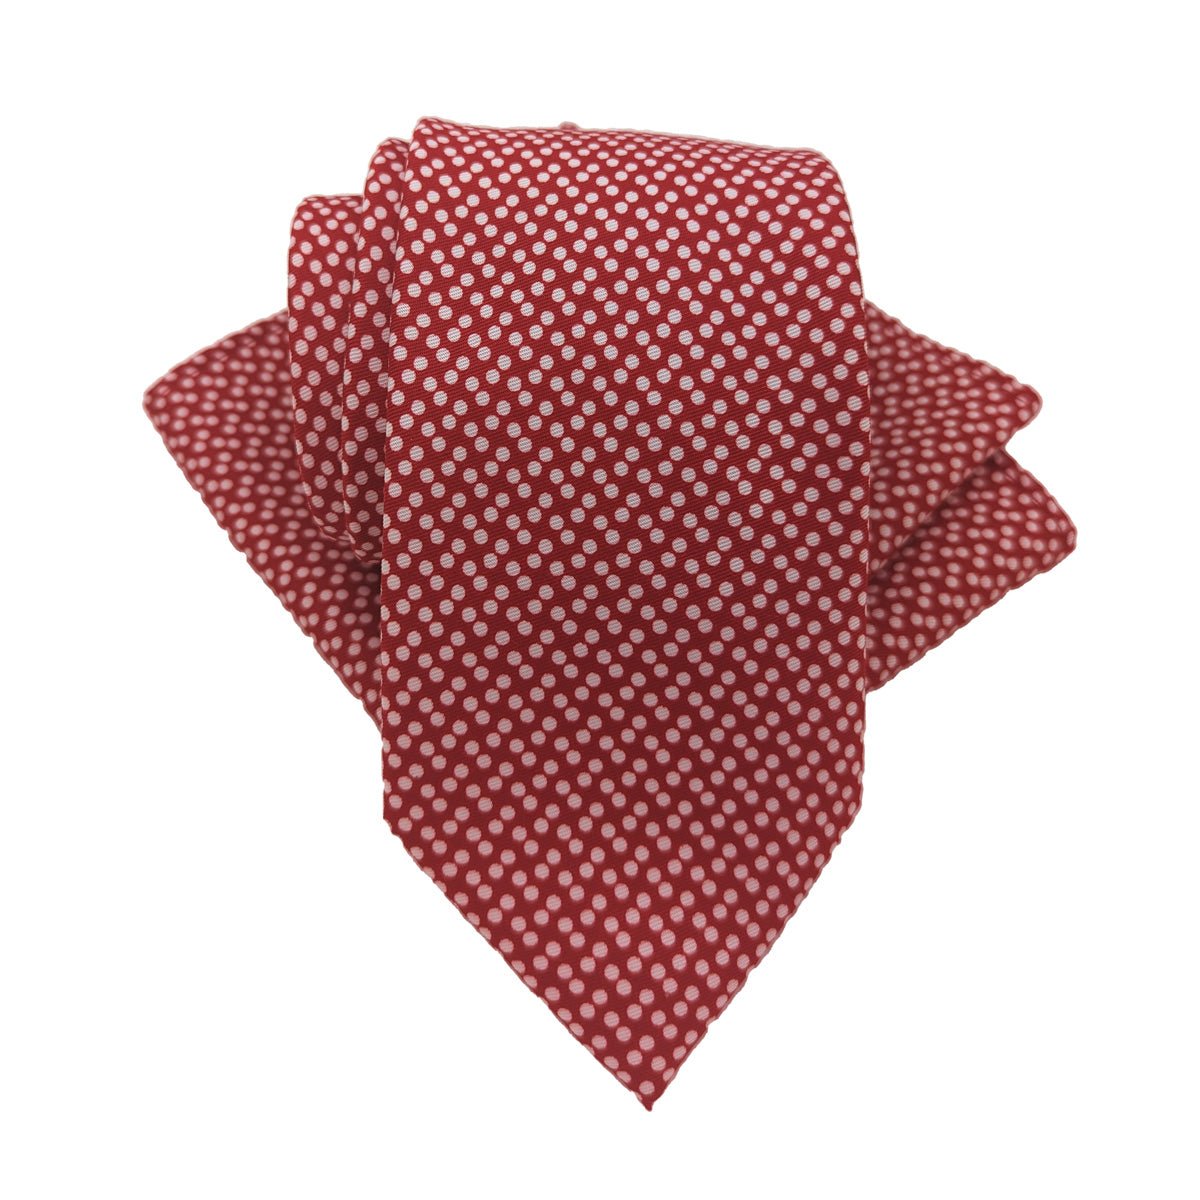 Cranberry Dotty Pocket Square - Wedding Pocket Square - - Swagger & Swoon